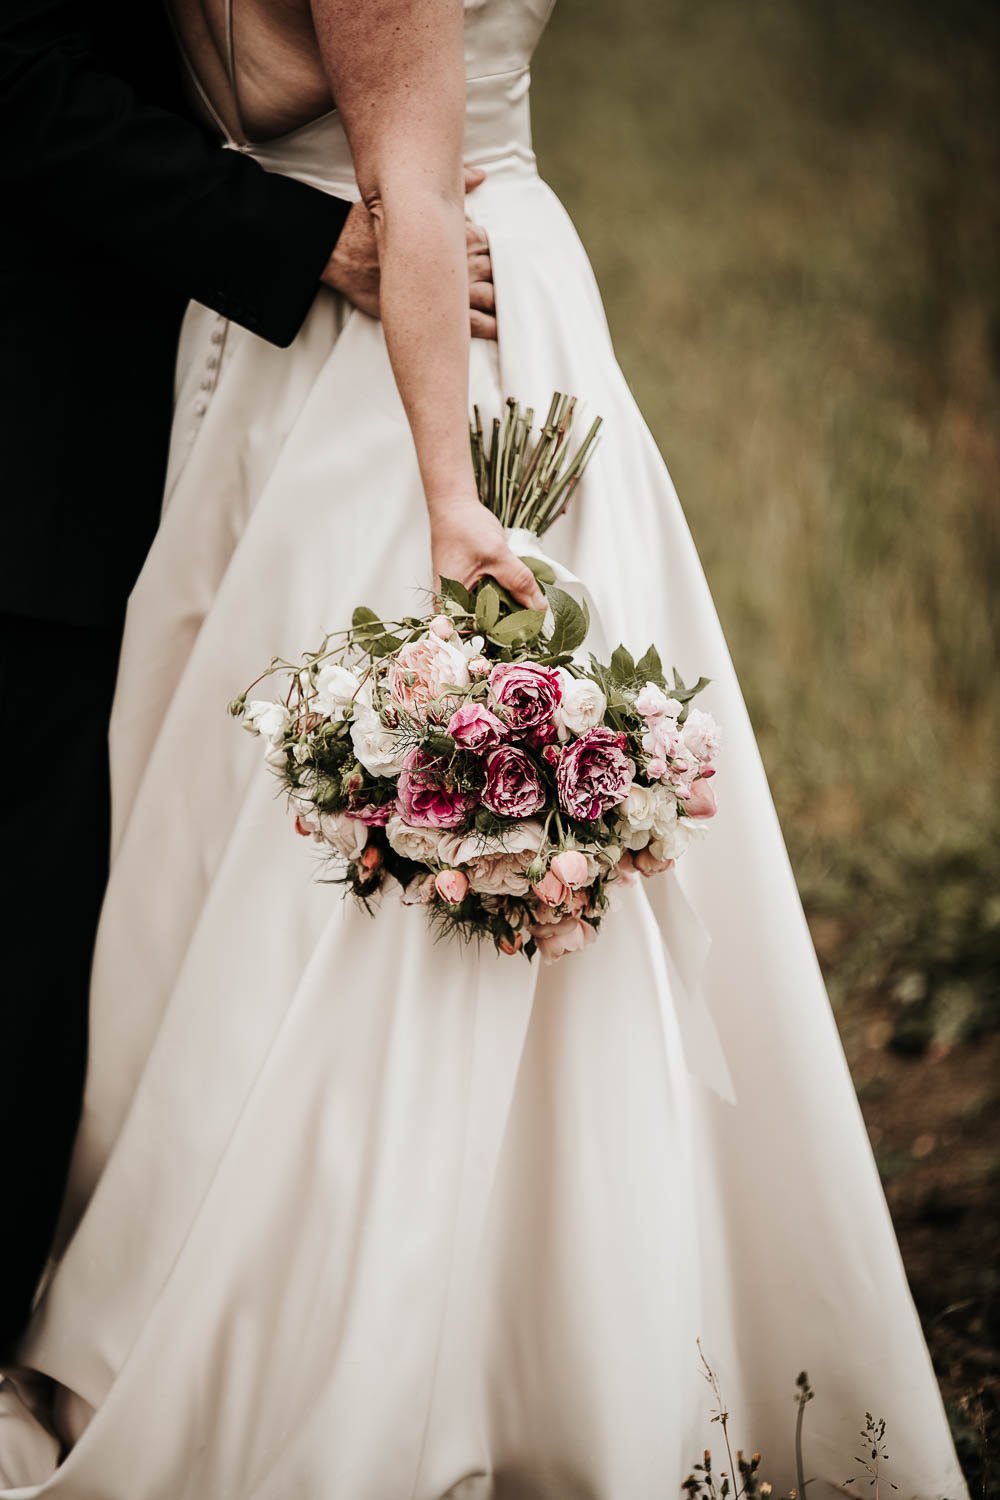 Bride holding bouquet by her side